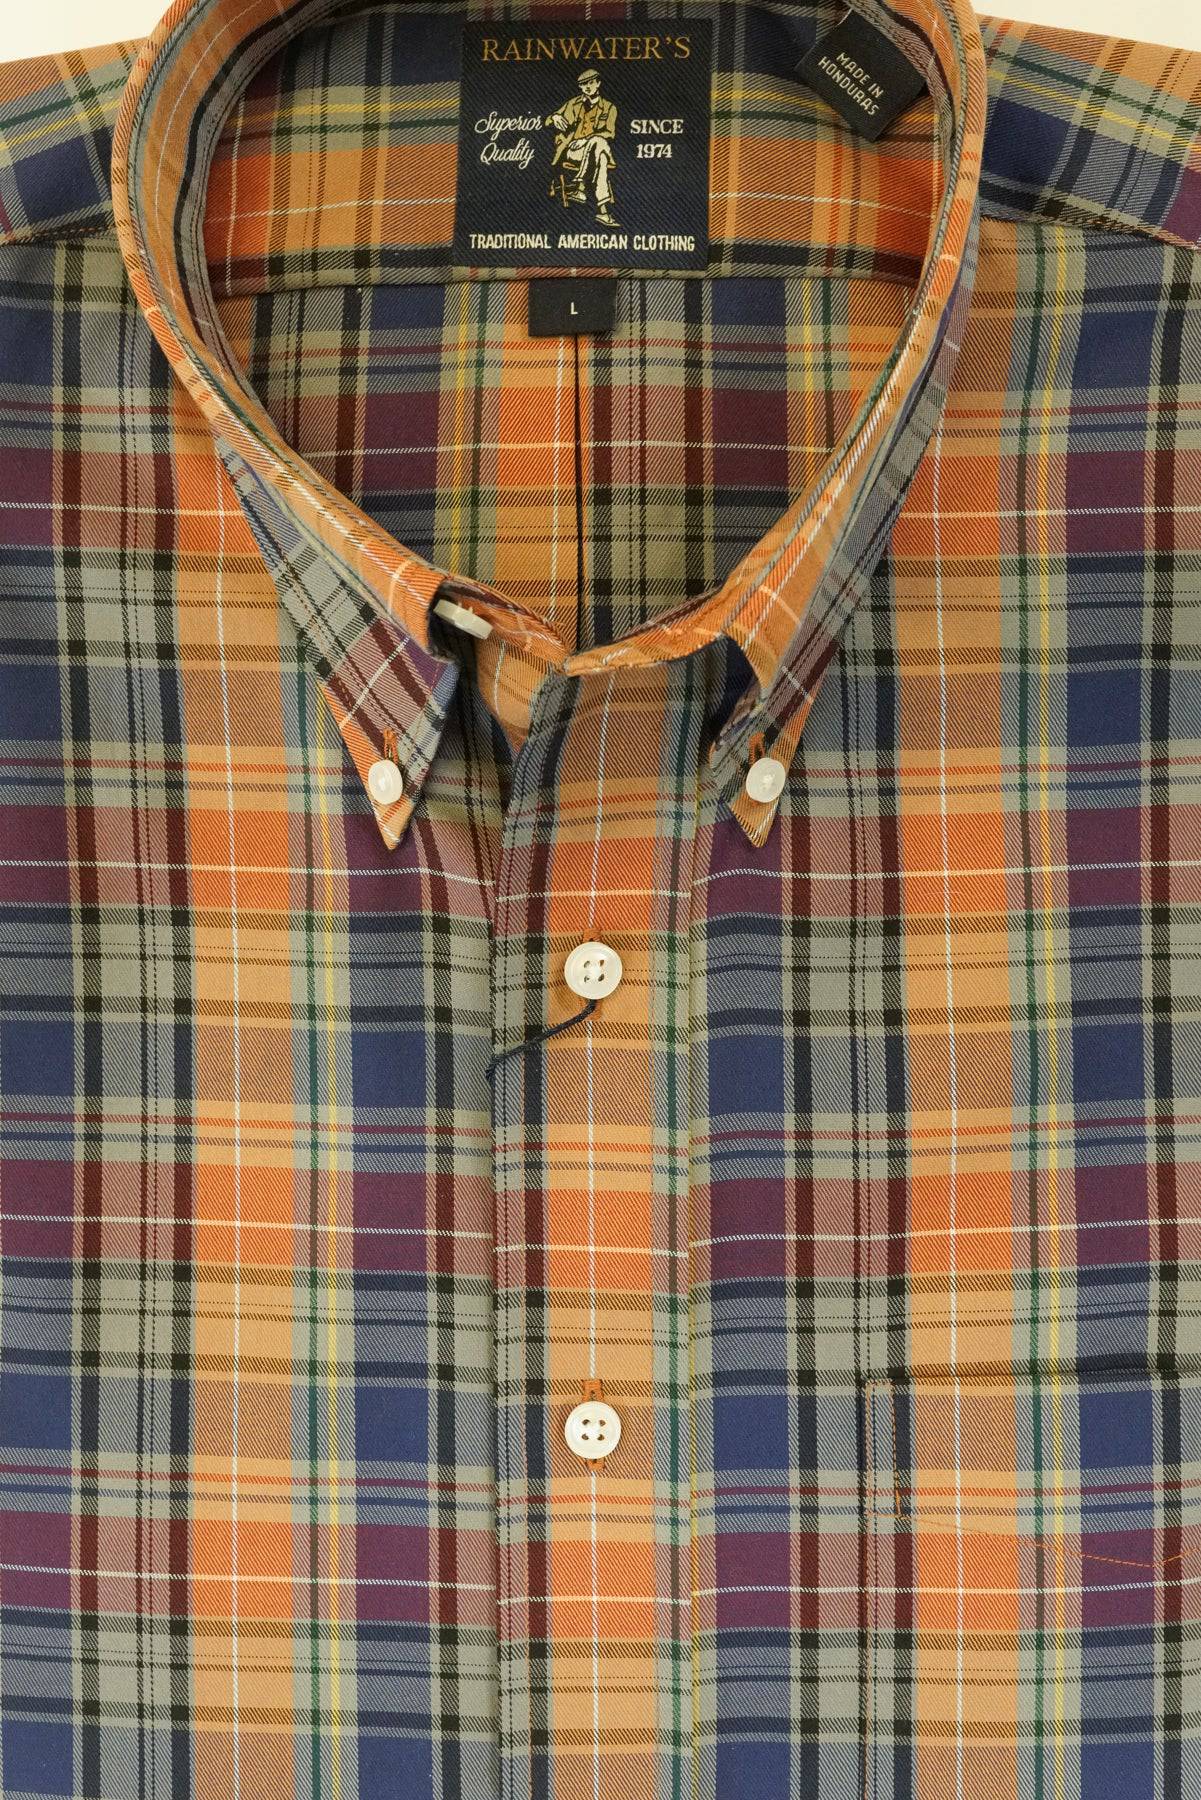 Navy & Apricot Plaid Wrinkle Free Button Down Sport Shirt by Rainwater's - Rainwater's Men's Clothing and Tuxedo Rental